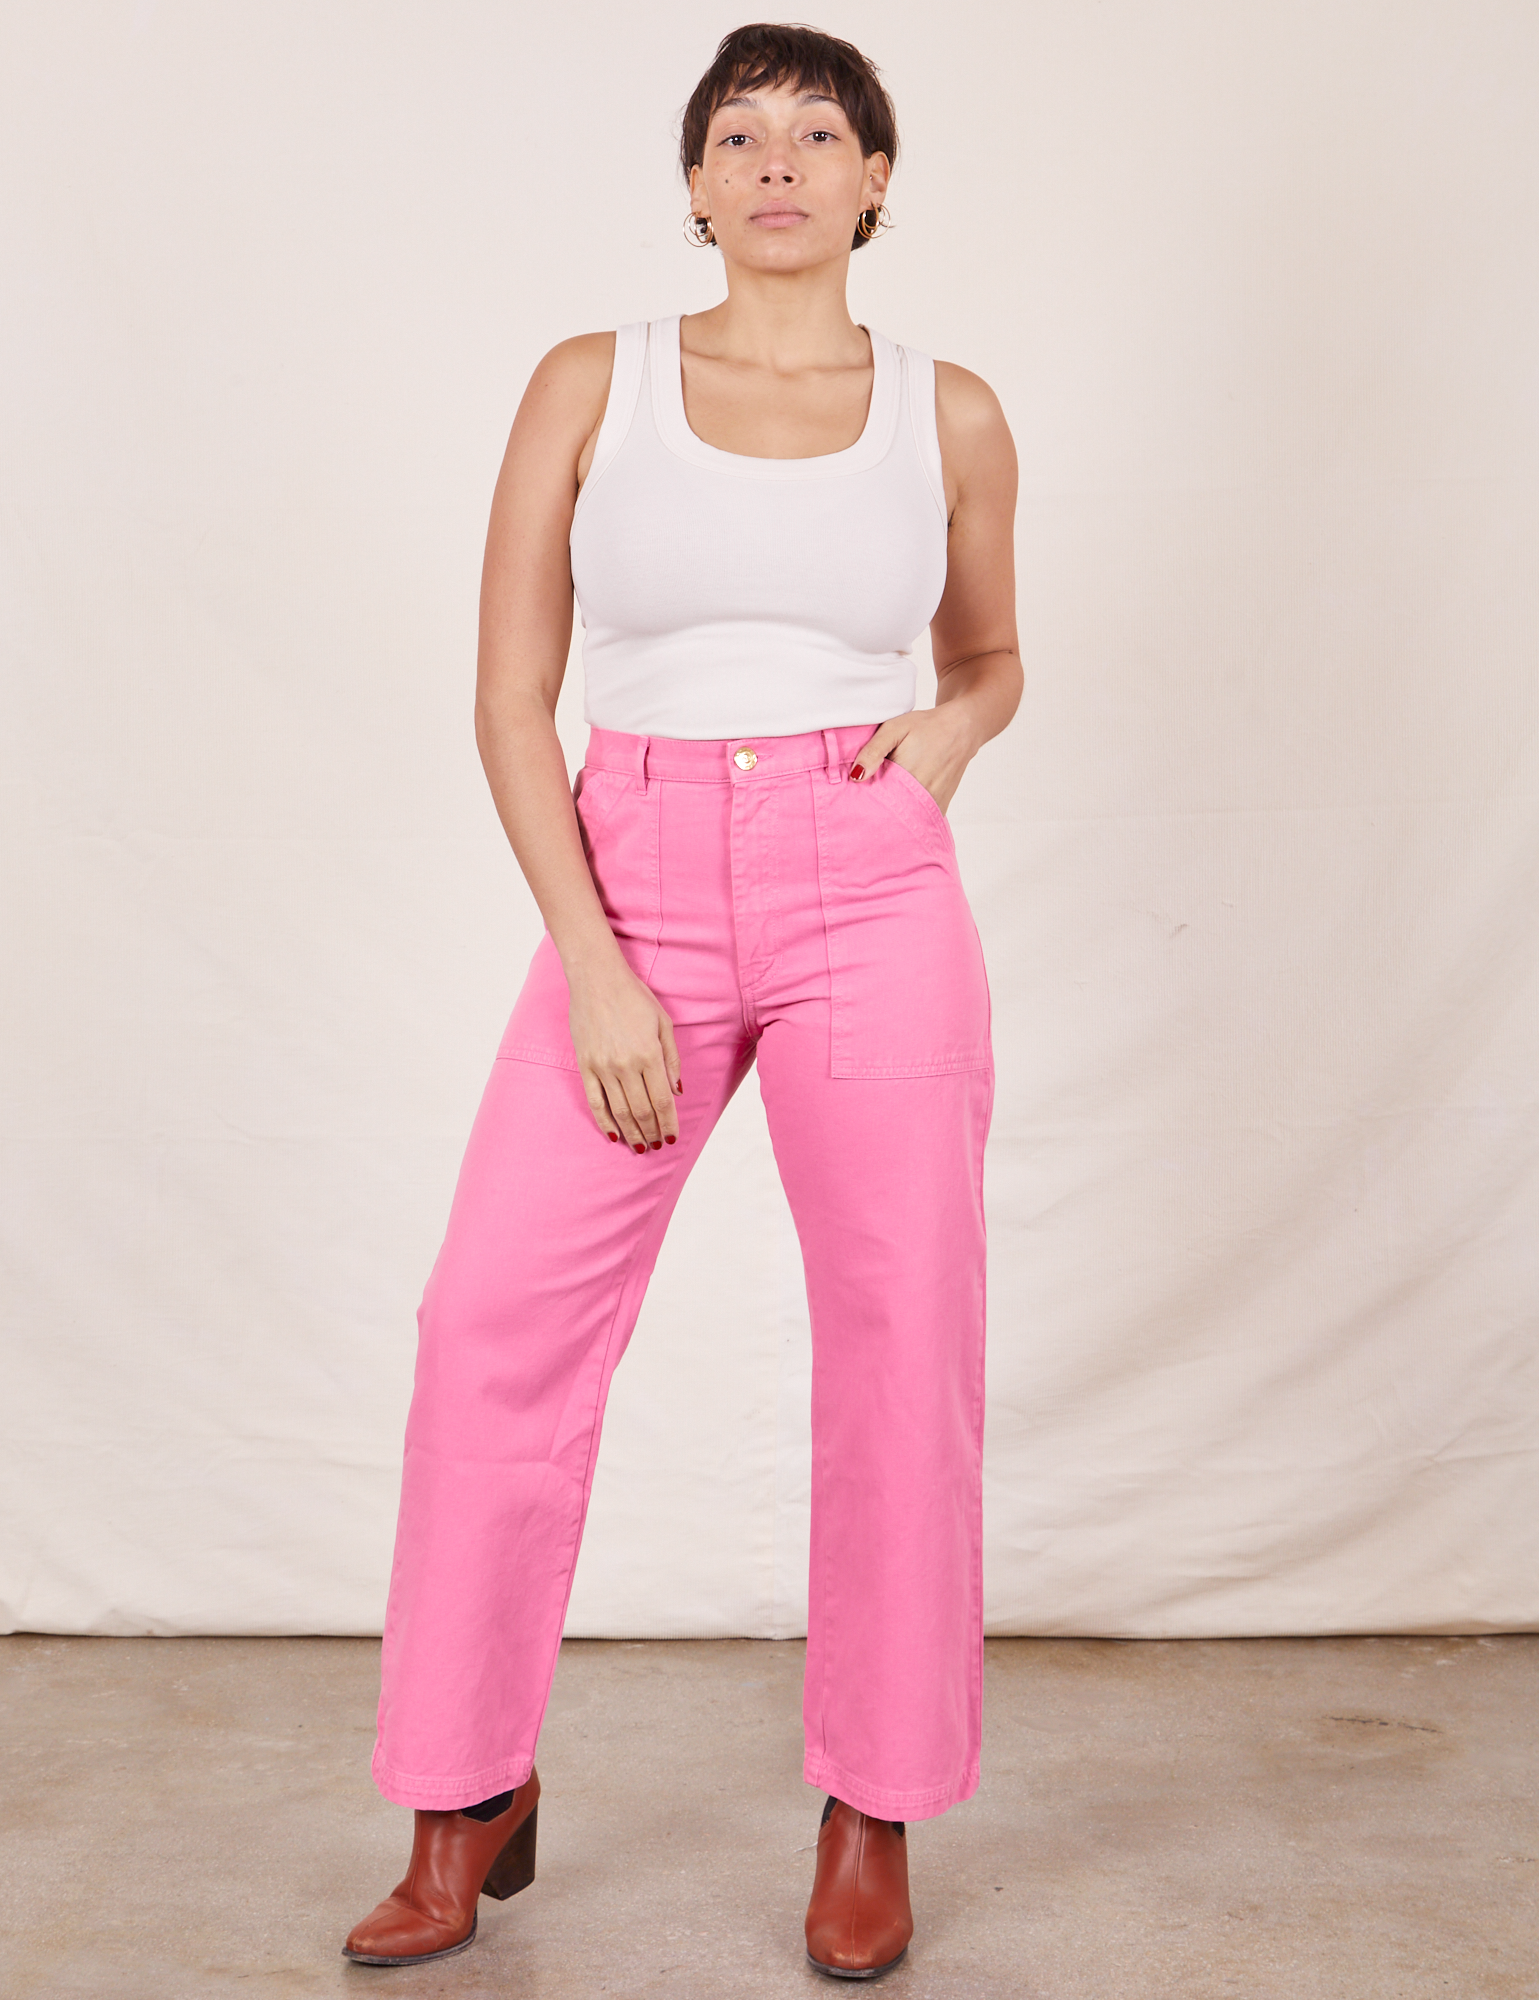 Tiara is 5&#39;4&quot; and wearing size S Work Pants in Bubblegum Pink paired with vintage off-white Tank Top